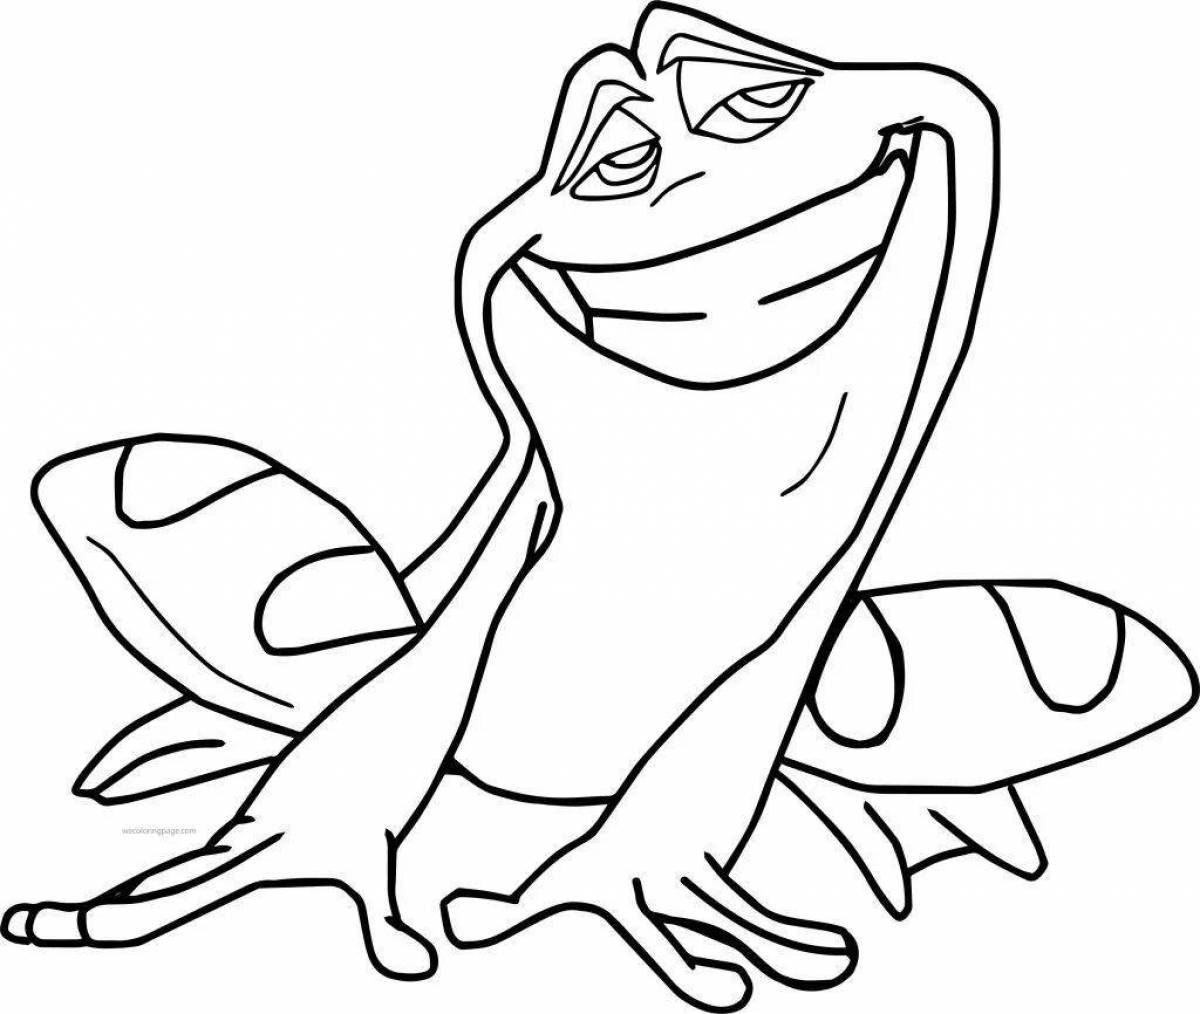 Colorful cartoon frog coloring book